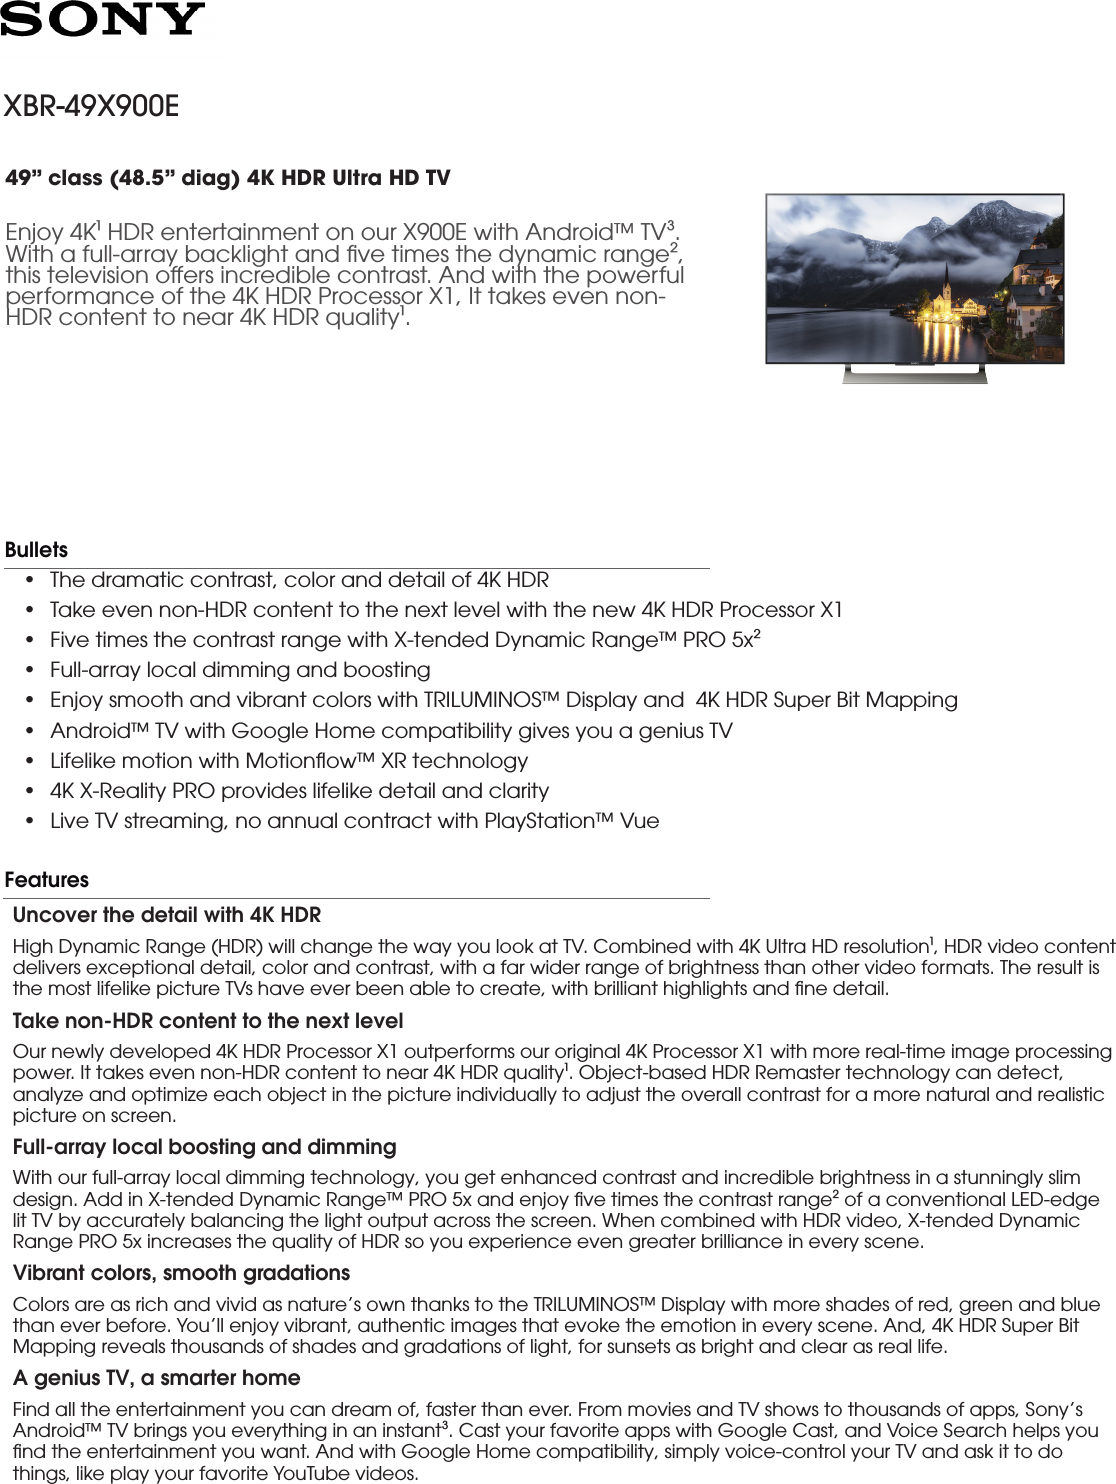 Page 1 of 4 - Sony XBR-49X900E User Manual Marketing Specifications XBR49X900E Mksp